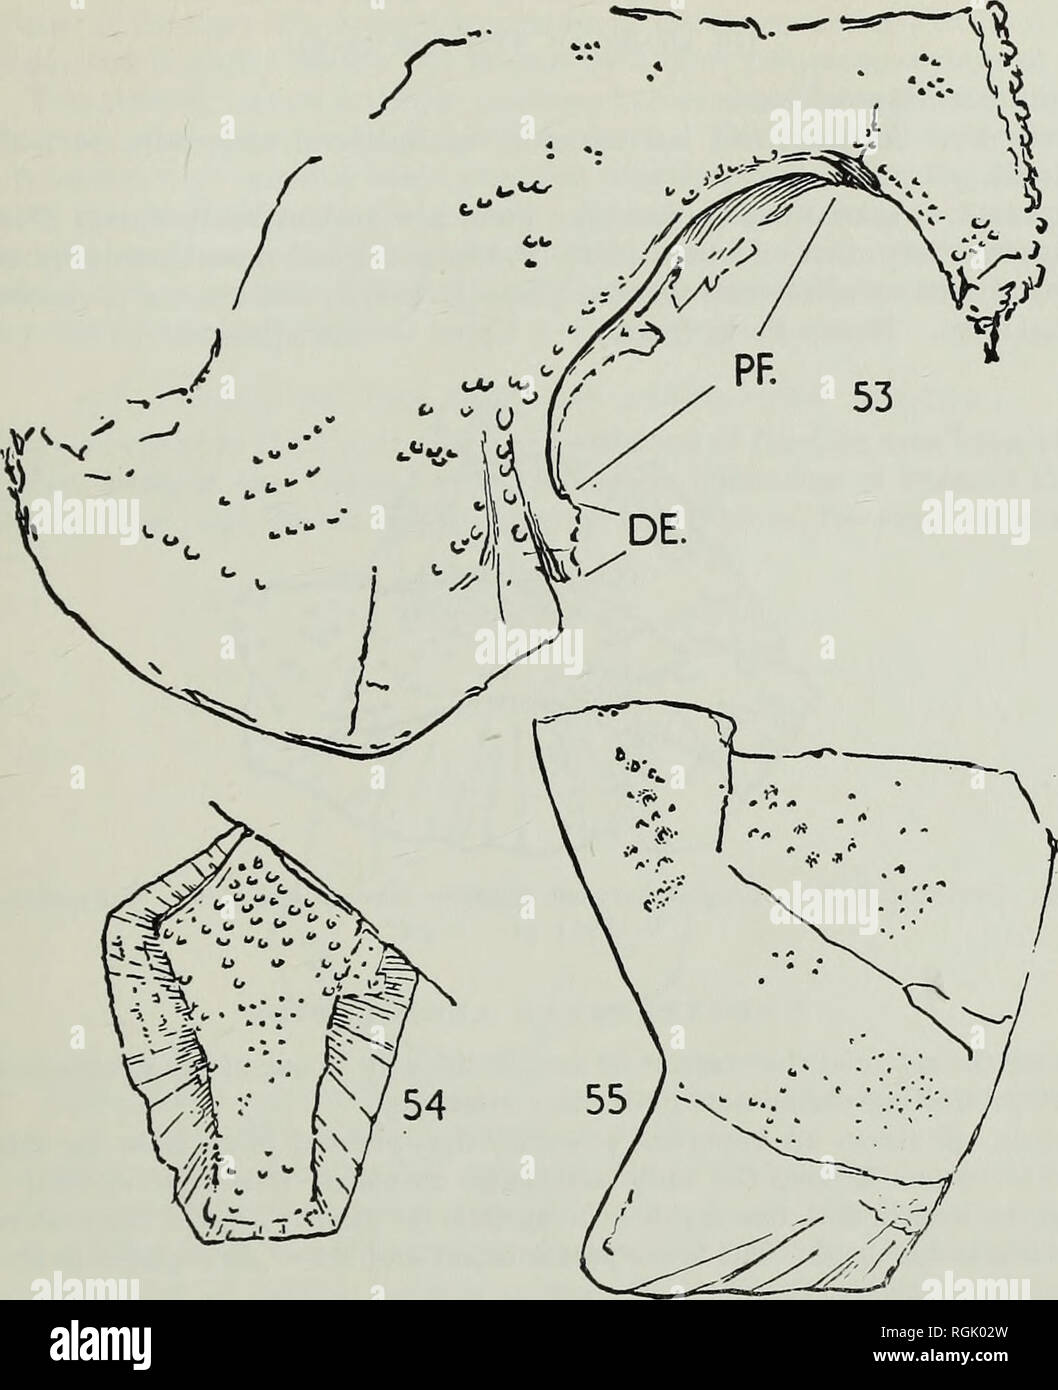 . Bulletin of the British Museum (Natural History), Geology. THE OLD RED SANDSTONE OF BROWN CLEE HILL 299. Wheathillaspis wickhamkingi gen. et sp. nov. Fig. 53. Part of left anterior ventro-lateral and spinal plates. DE, dorsal extension of anterior ventro-lateral plate ; PF, pectoral fenestra. The holotype. P. 28908. X 5-6. Fig. 54. Median ventral plate. P.28910. x 4-8. Fig. 55. Imperfect left anterior lateral plate, largely in impression. P.28911. x 4-8. All from Besom Farm Quarry. Remarks. The genus is best denned on the basis of the first specimen, the essential features being the very lar Stock Photo